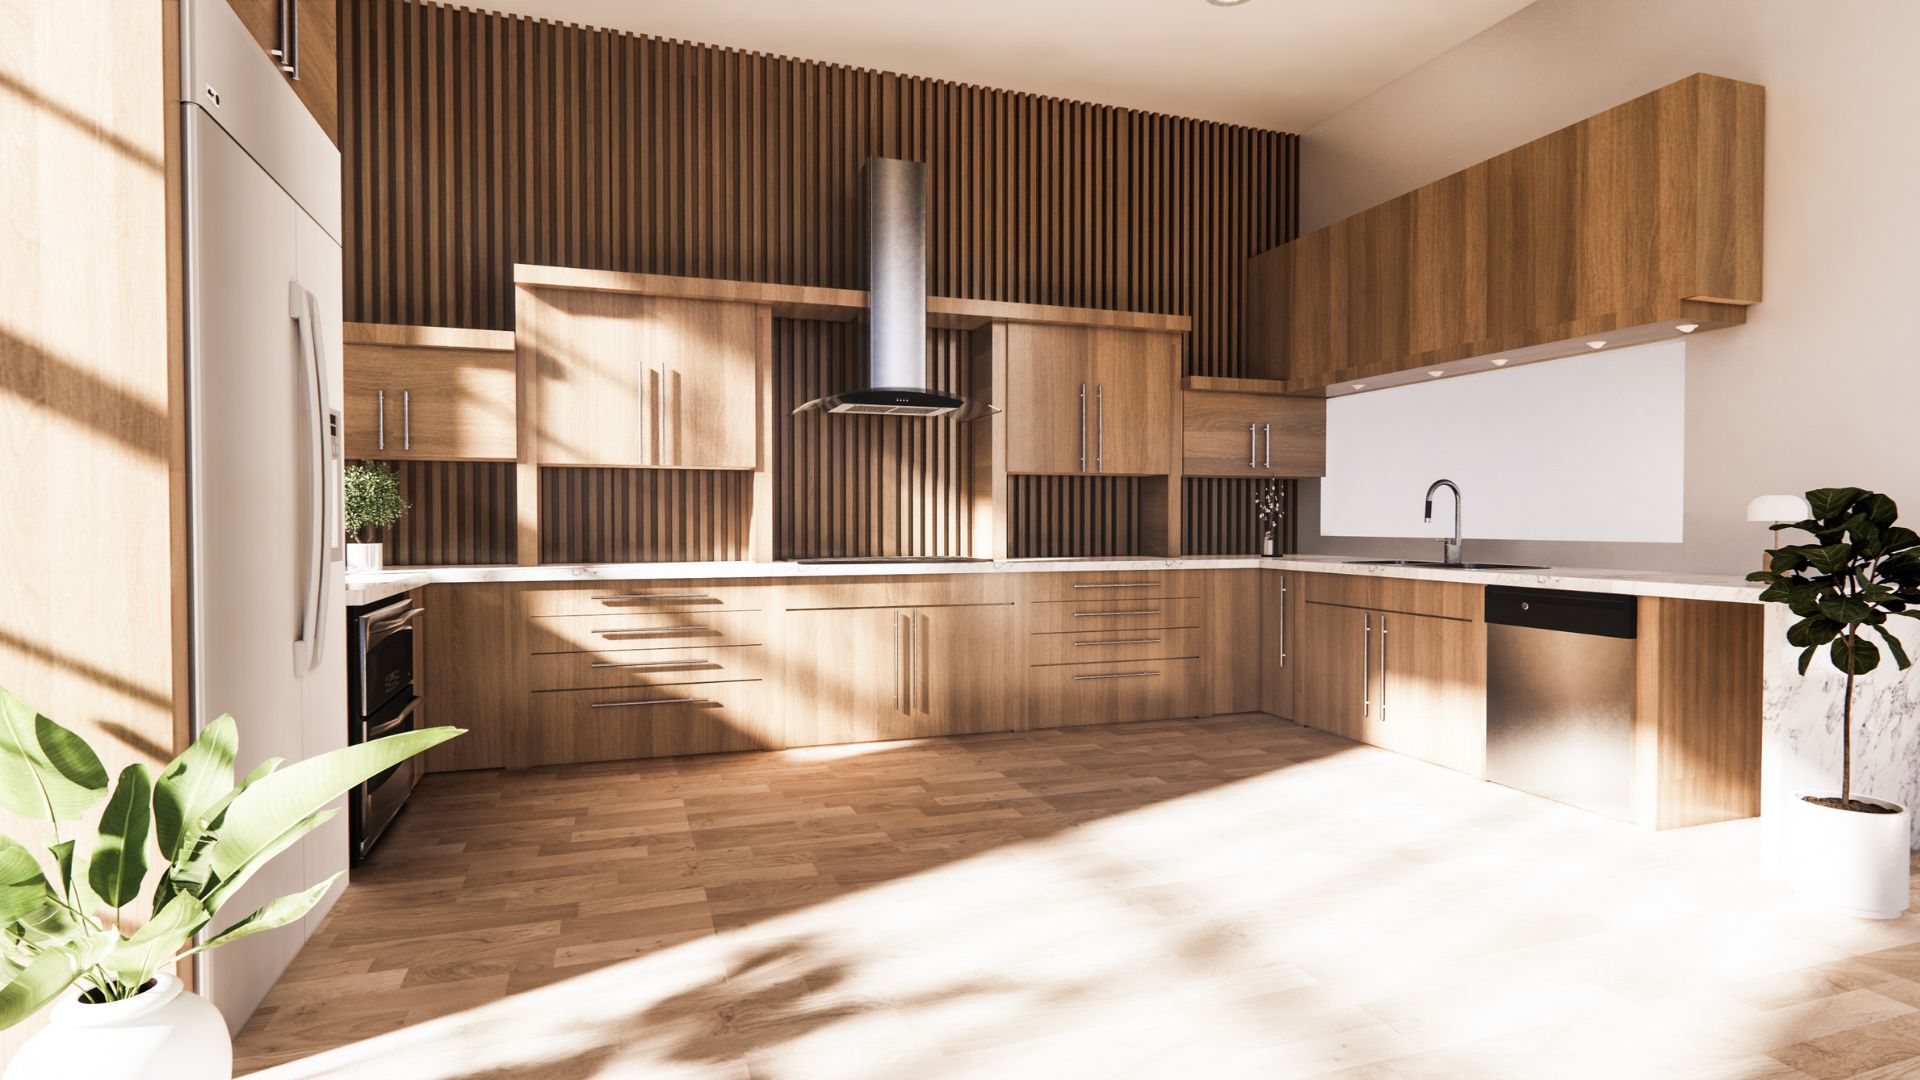 5 interior designs for an unforgettable custom kitchen remodel - wood and timber kitchen